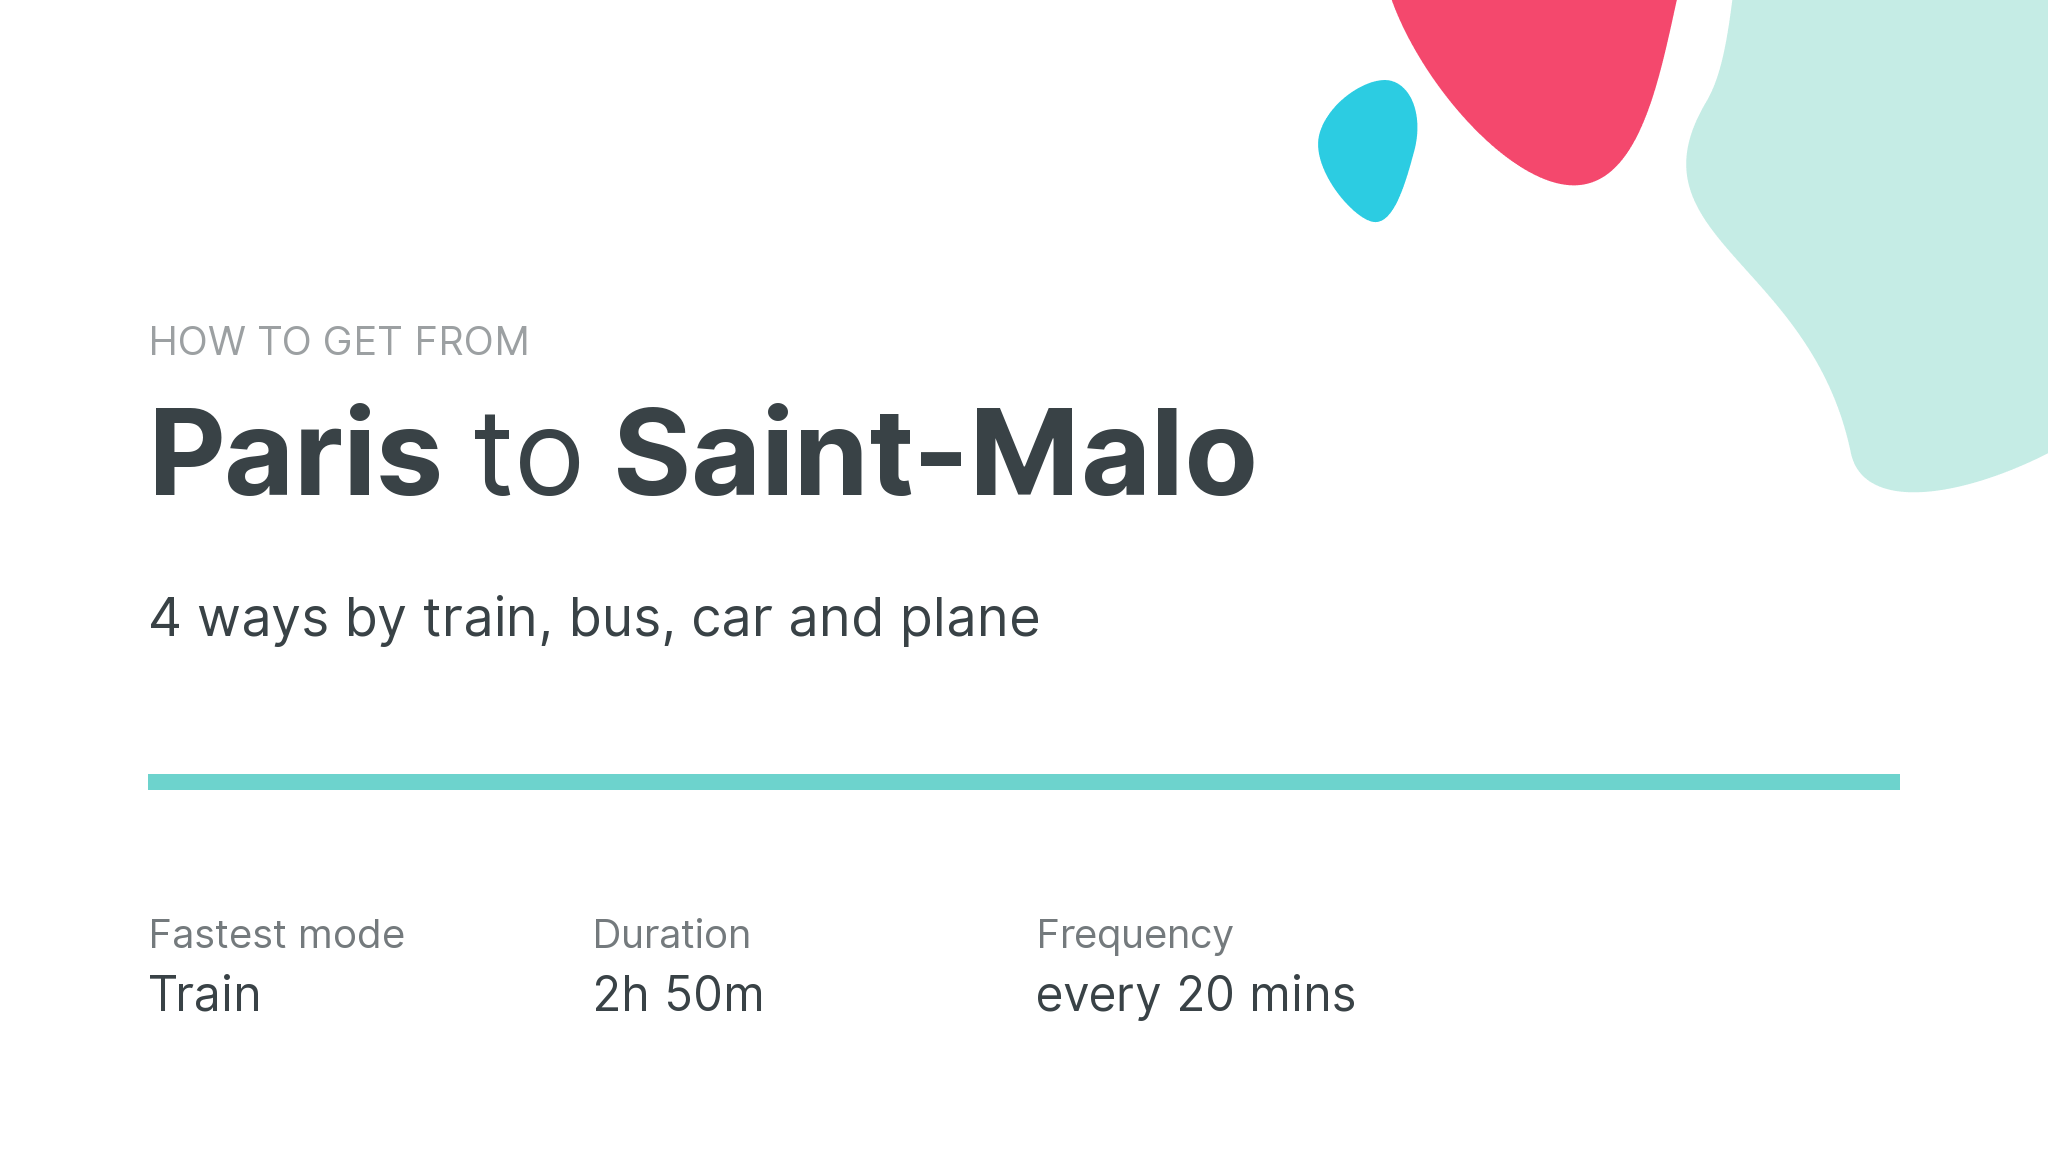 How do I get from Paris to Saint-Malo